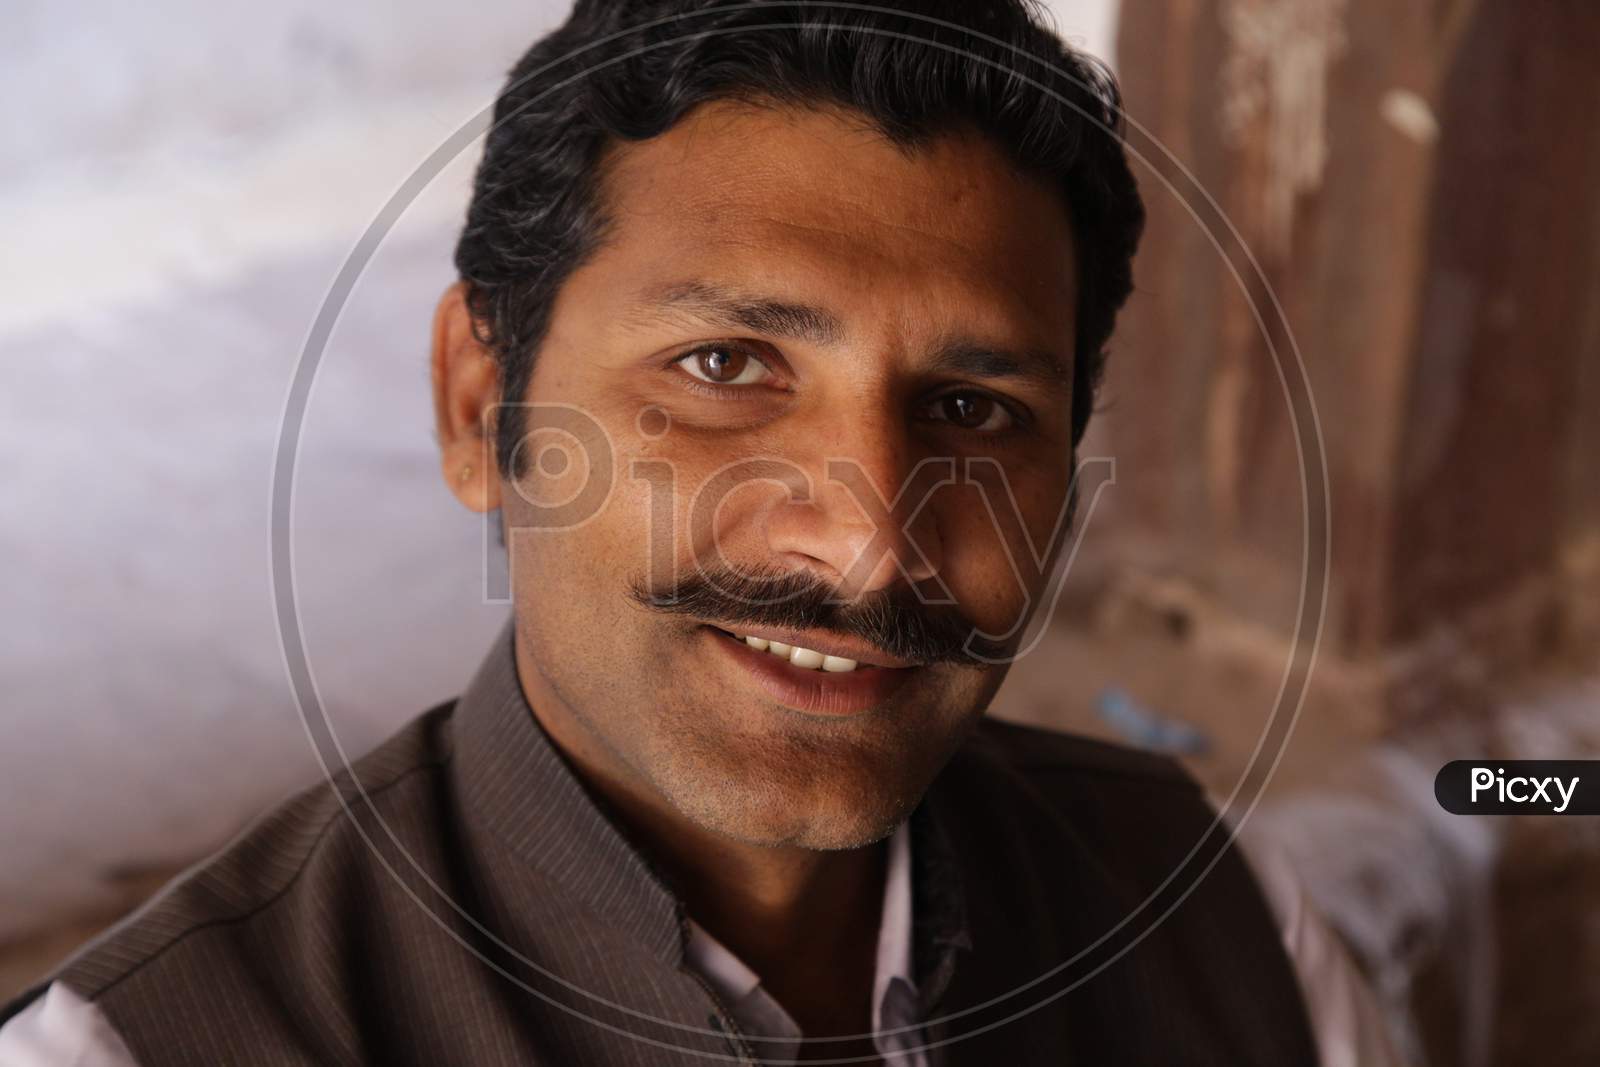 Indian man with moustache